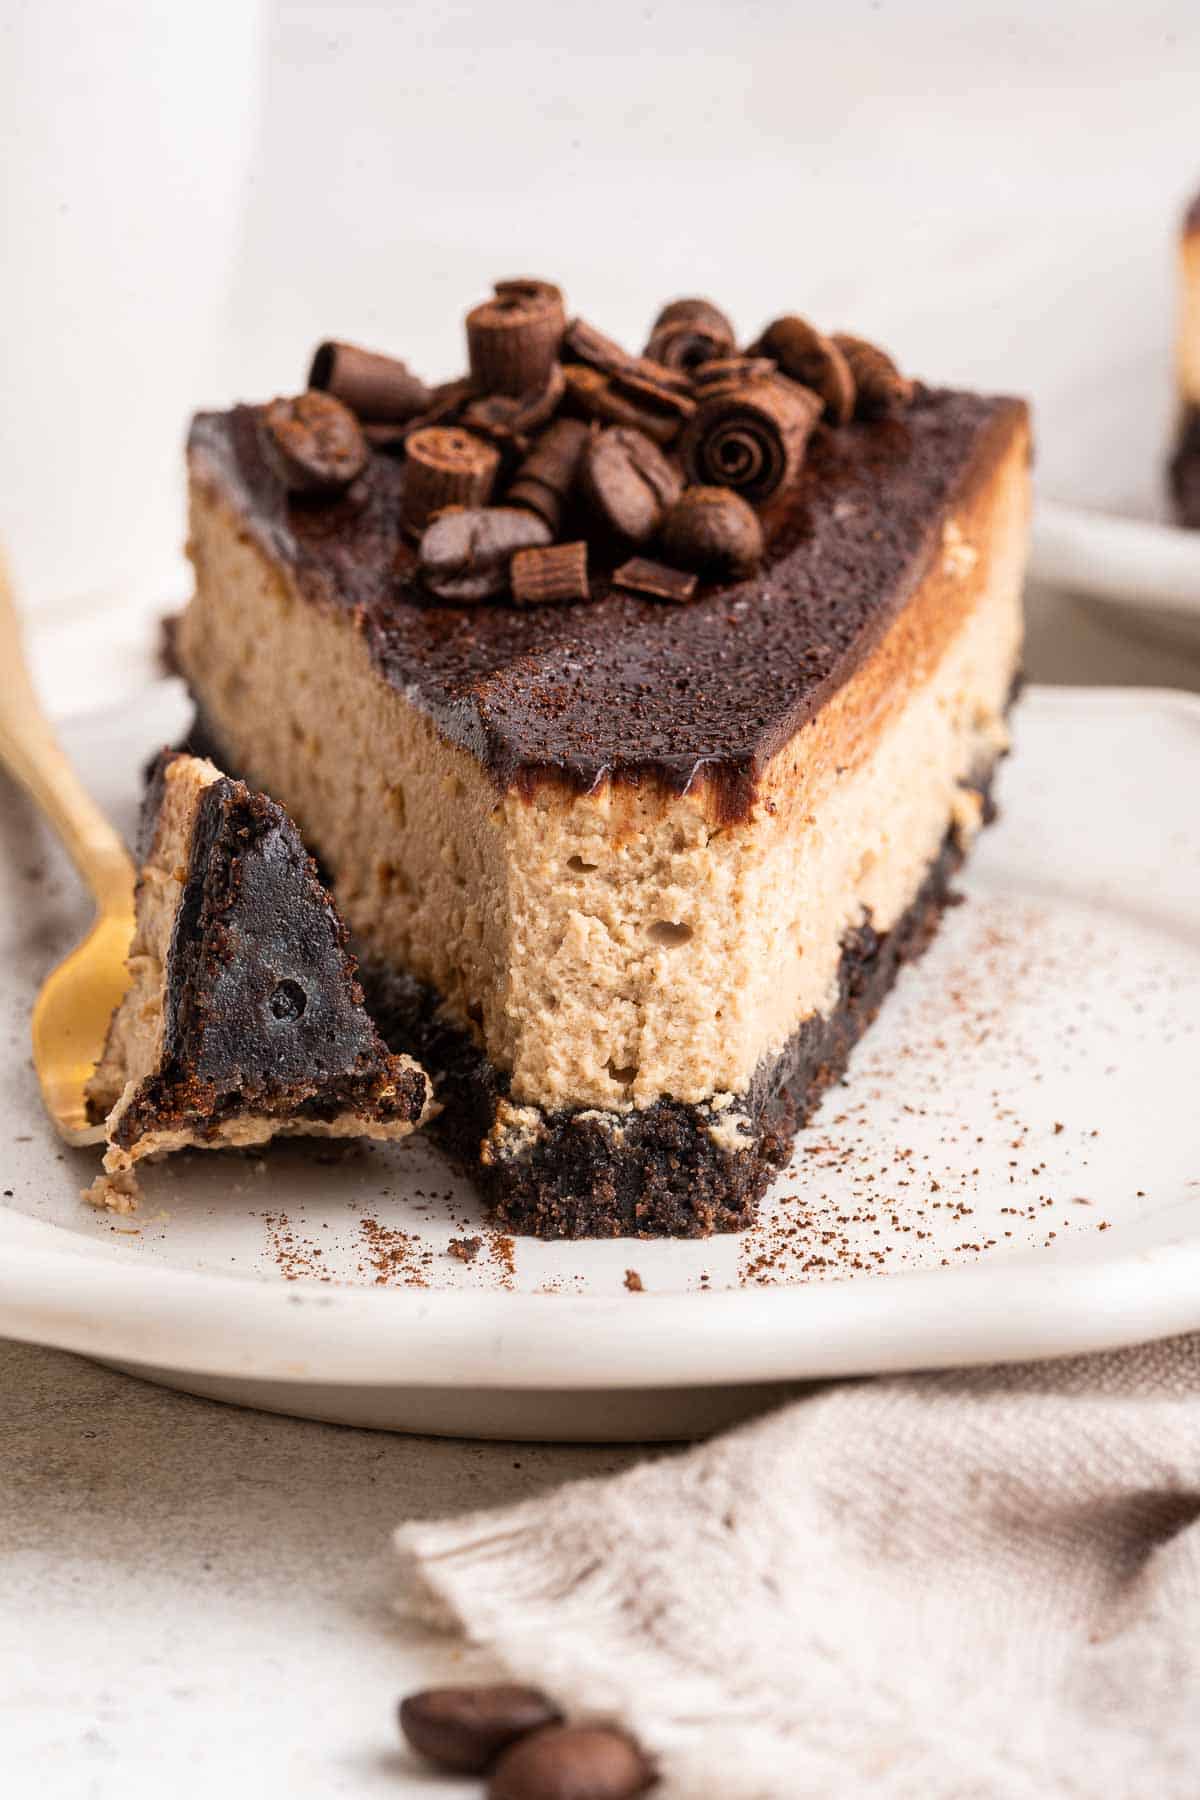 Up close shot of slice of coffee cheesecake decorated with chocolate curls.